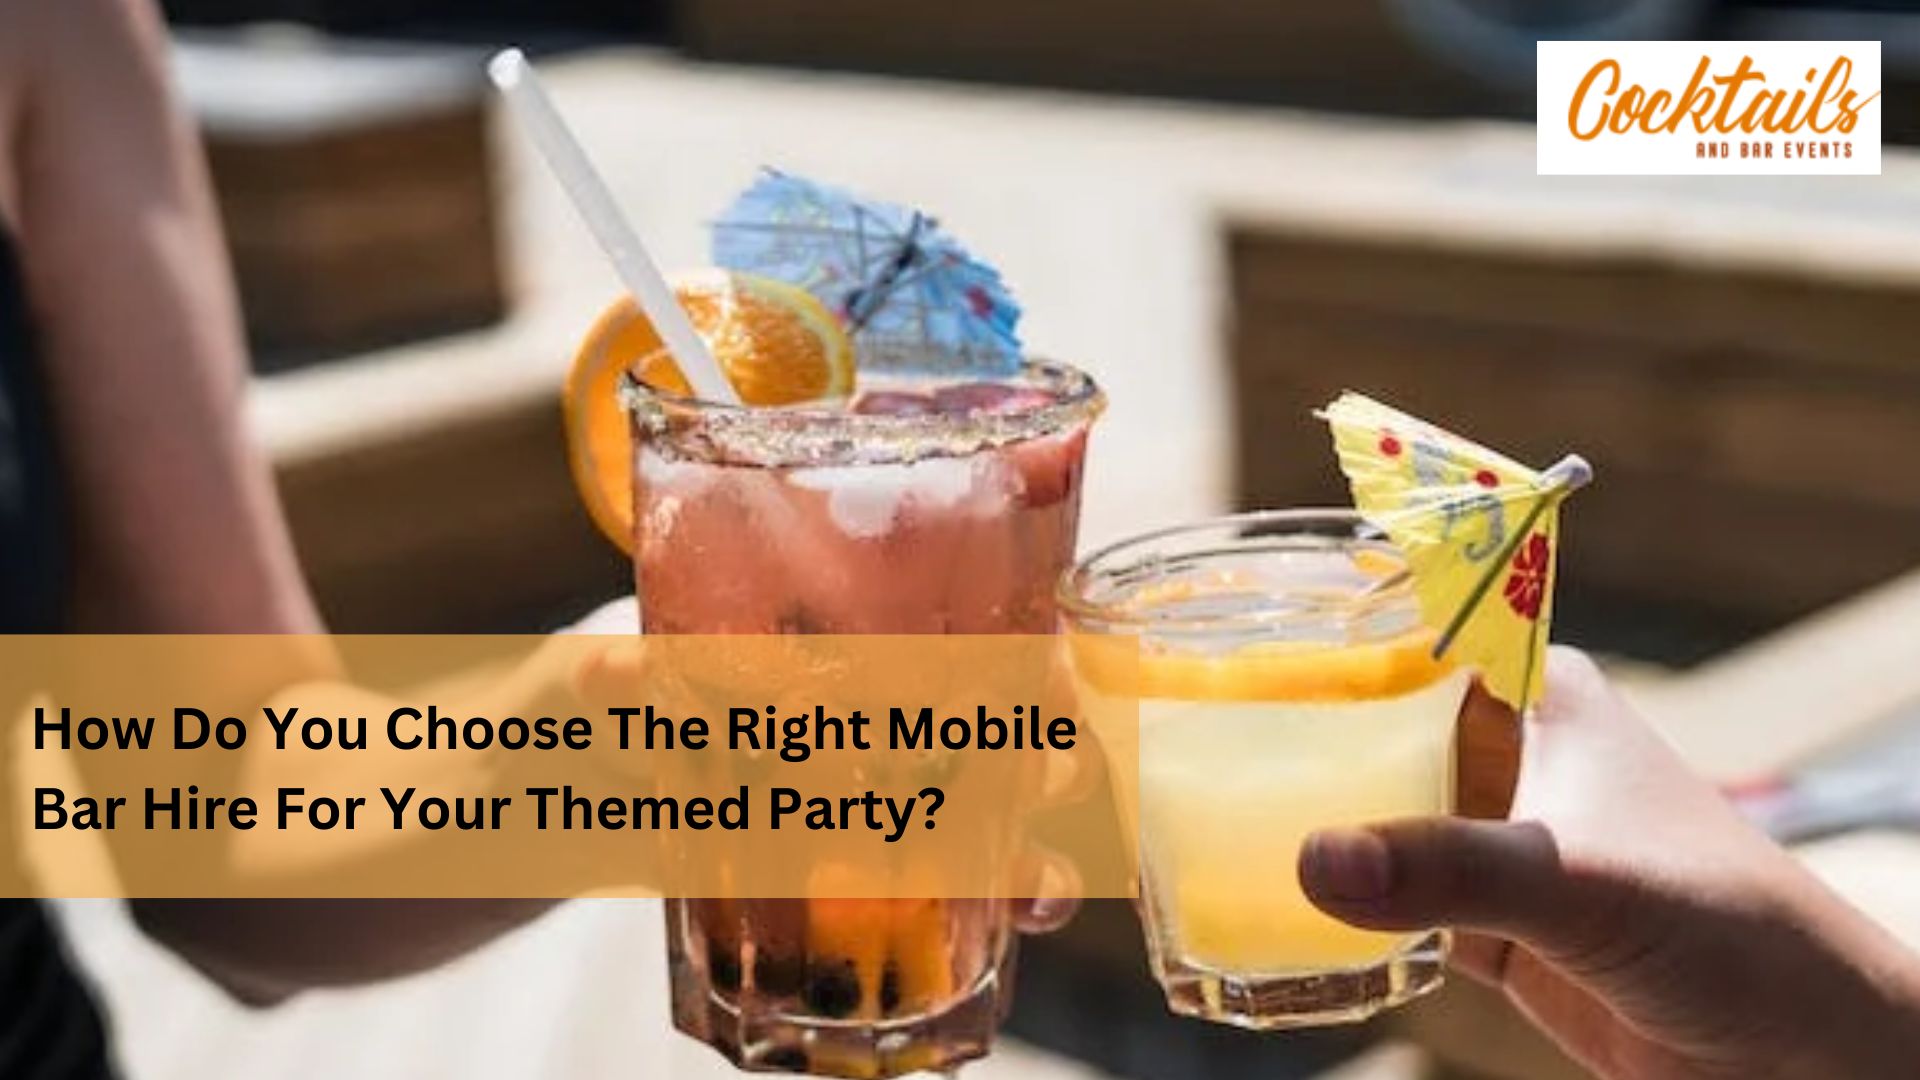 How Do You Choose The Right Mobile Bar Hire For Your Themed Party? -